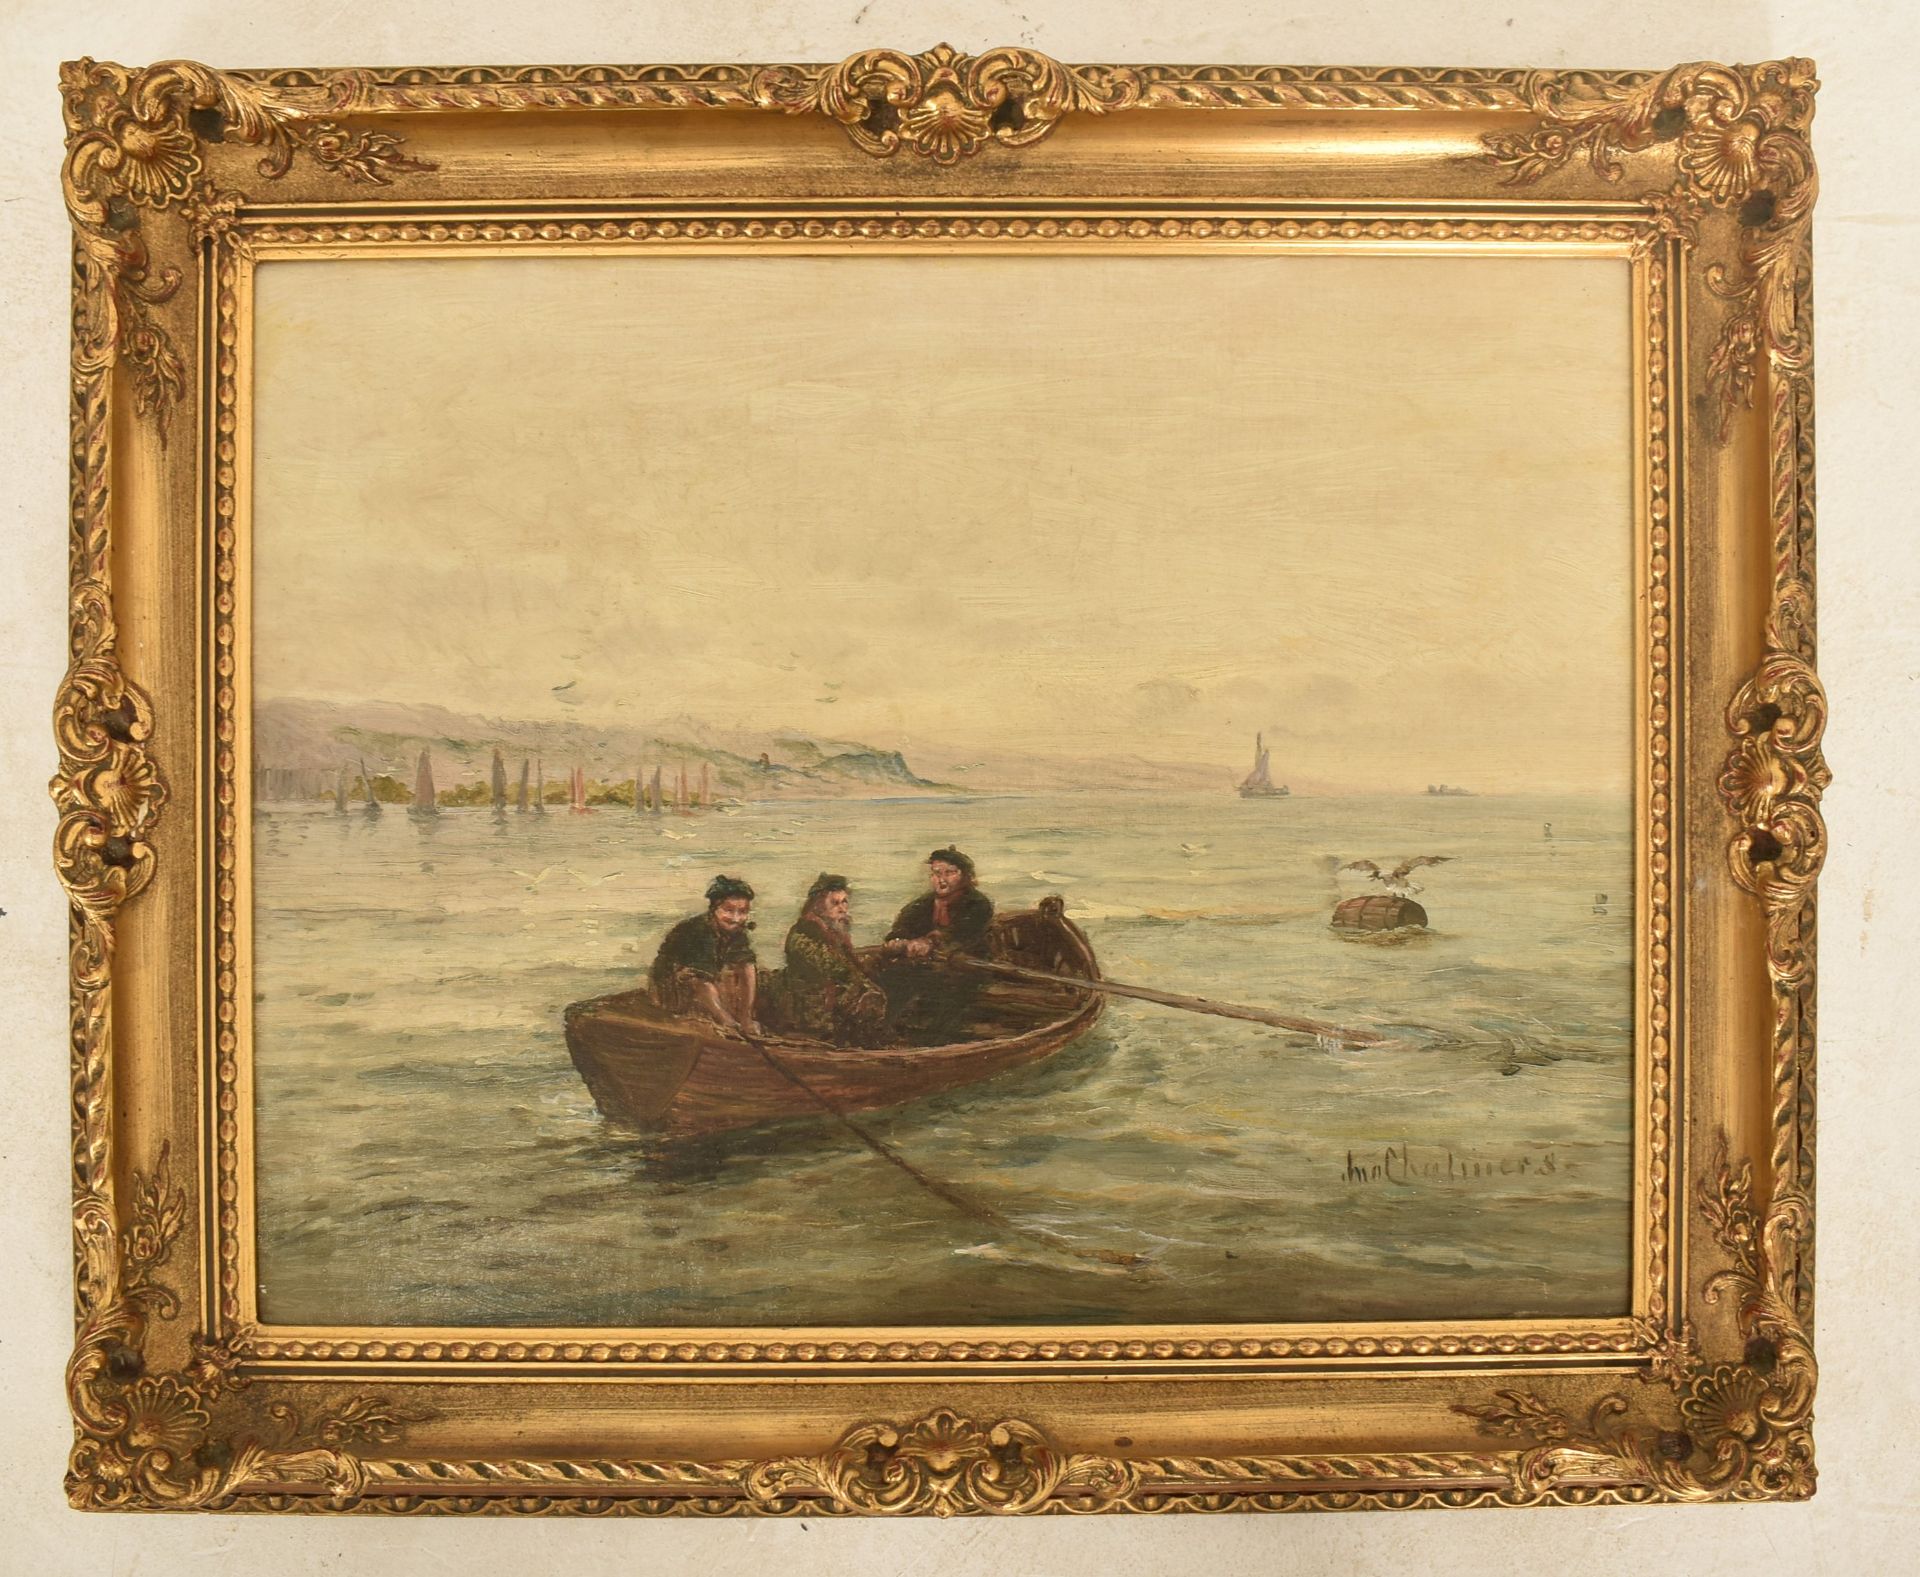 JOHN CHALMERS (1856-1933) - OIL ON CANVAS PAINTING OF FISHERMEN - Image 2 of 6